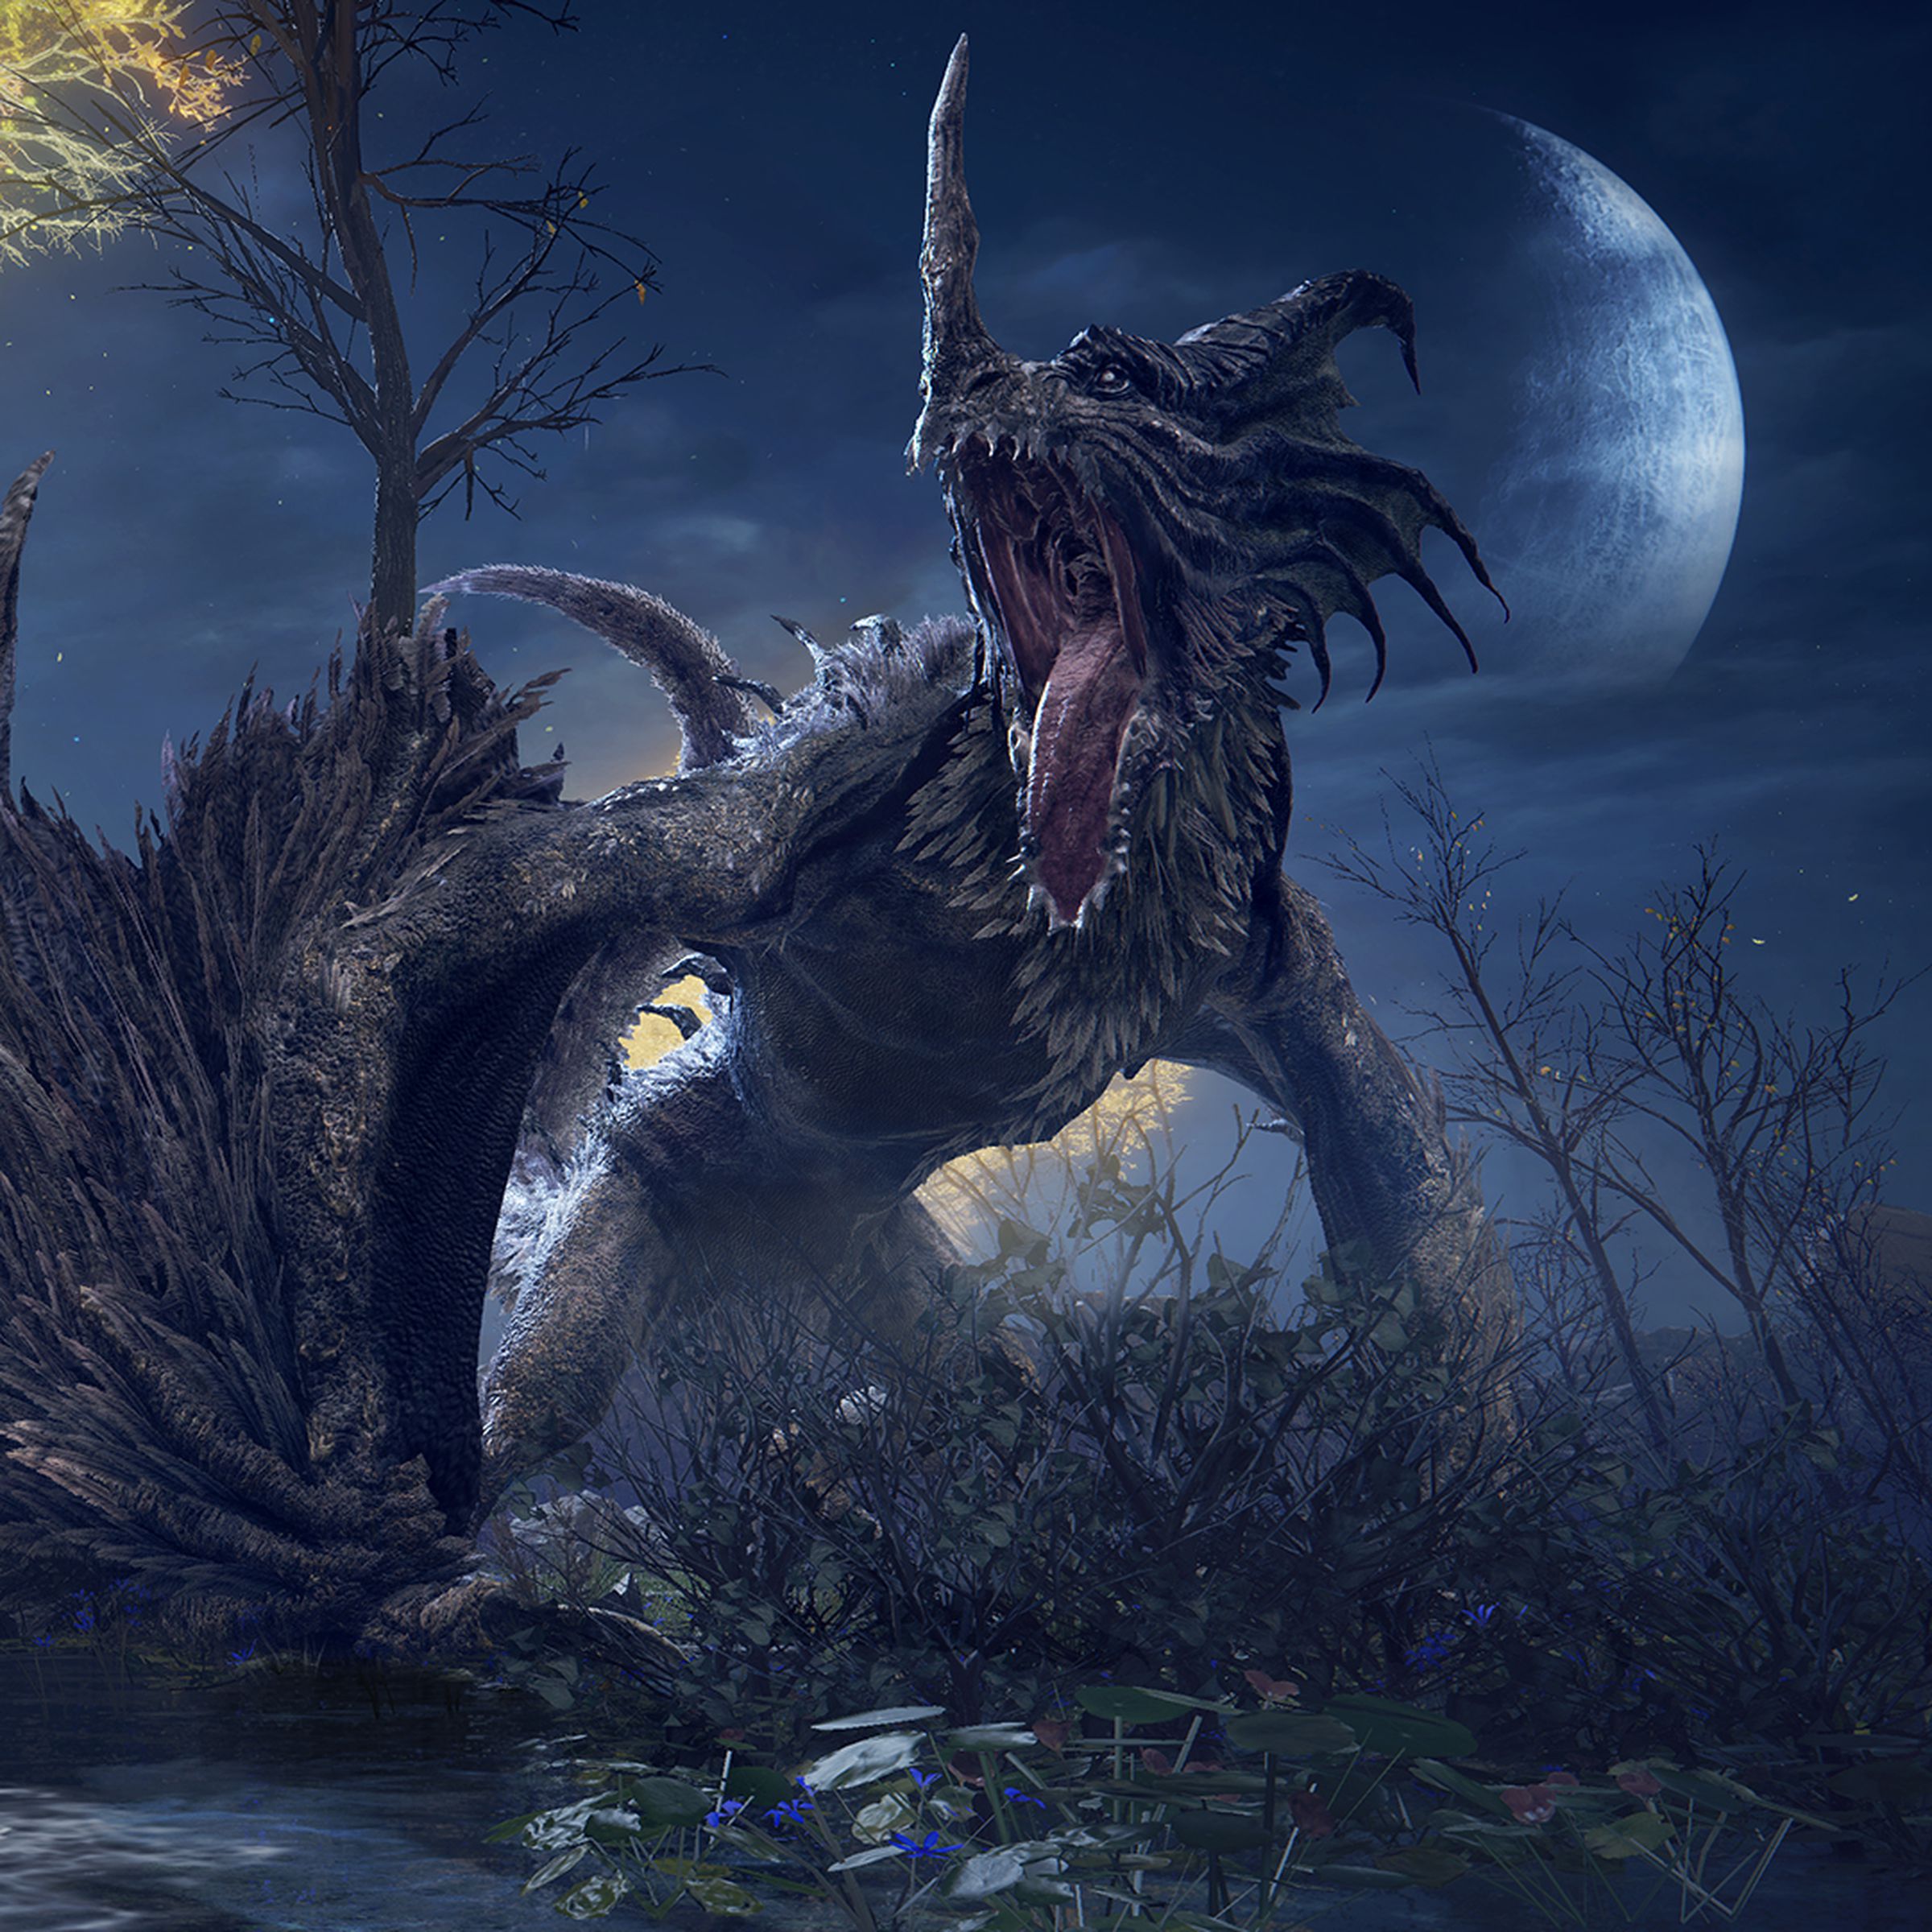 Screenshot pf a character fighting a beast from the Elden Ring game.